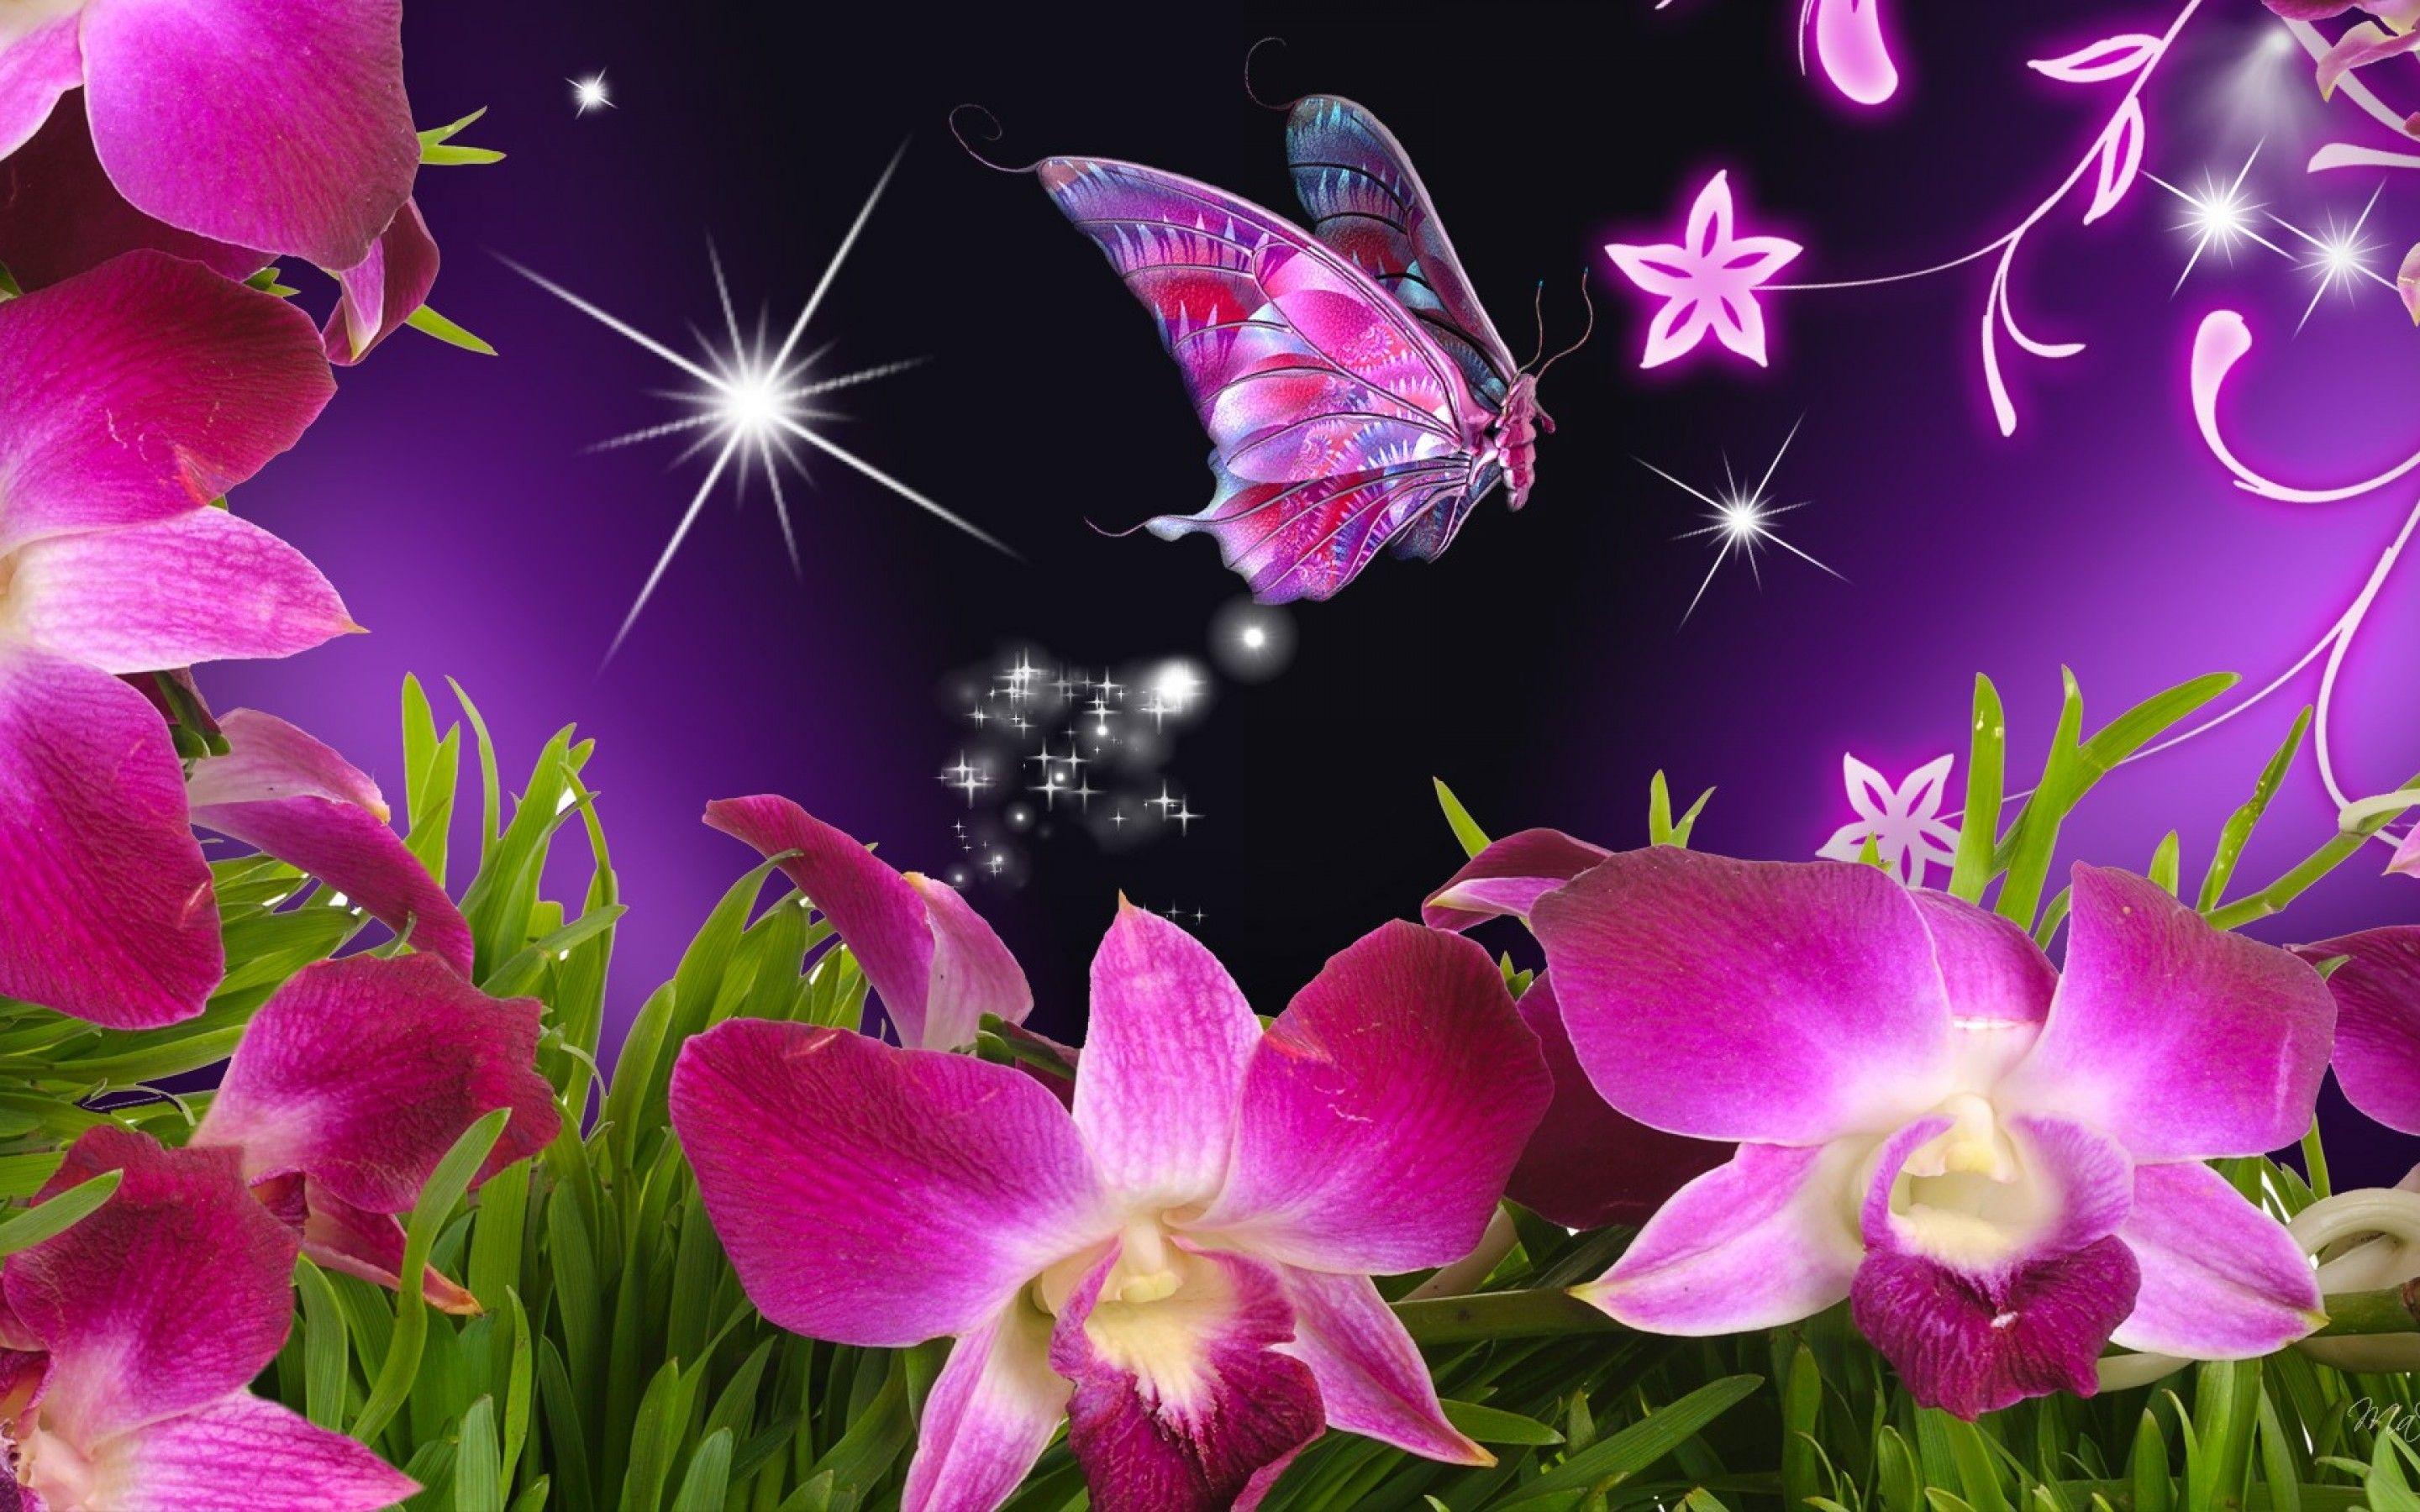 Natural 3D Image for Wallpaper with Butterfly and Flowers 1680×1050